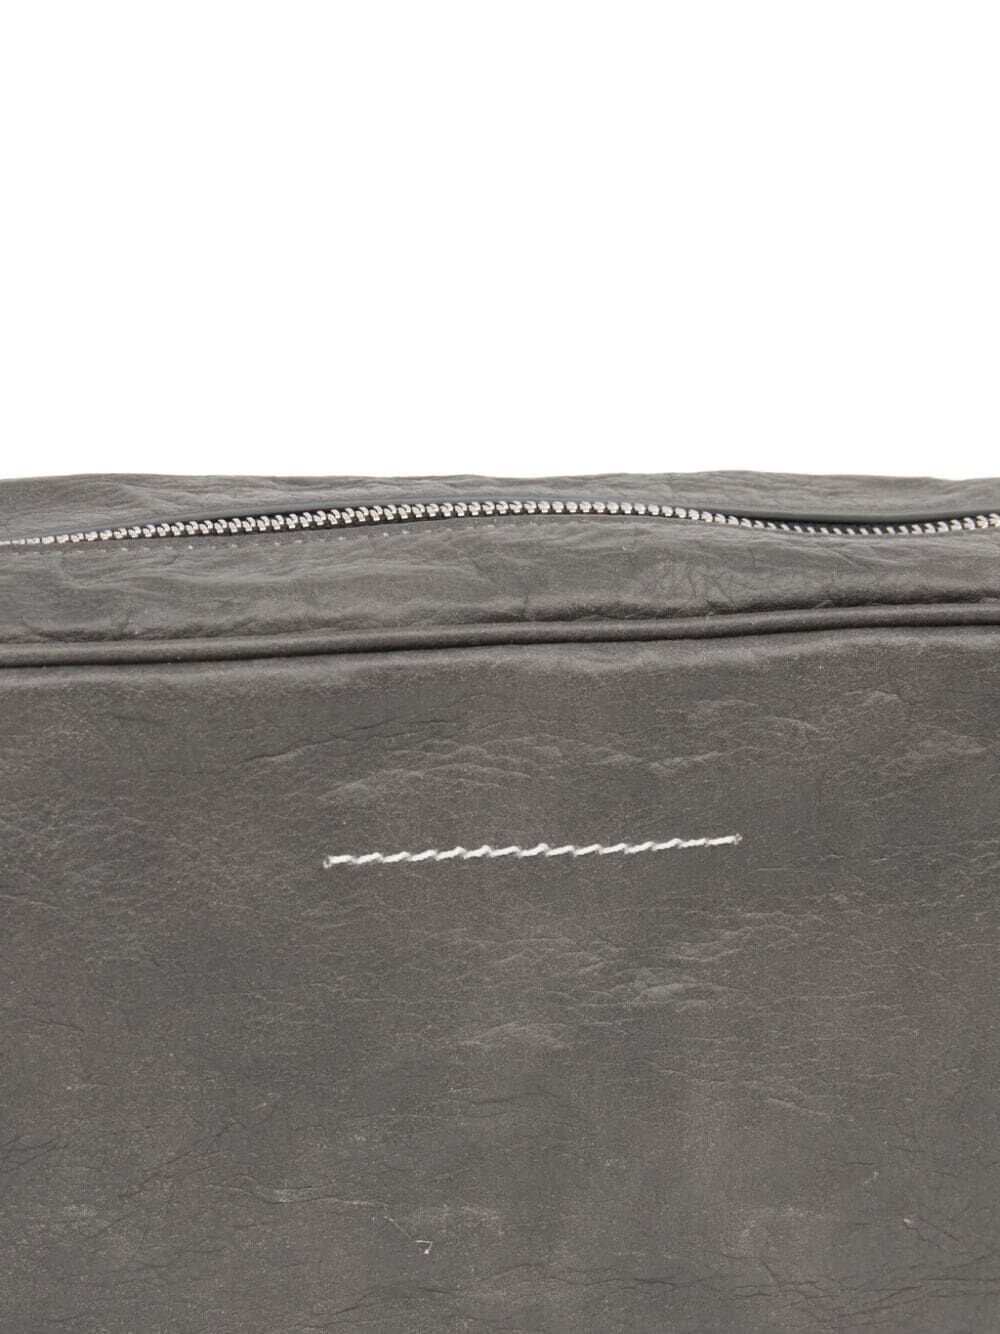 MM6 Maison Margiela-NUMERIC BAG SMALL - WORN OUT LEATHER-SB6WG0011P6705 T8013